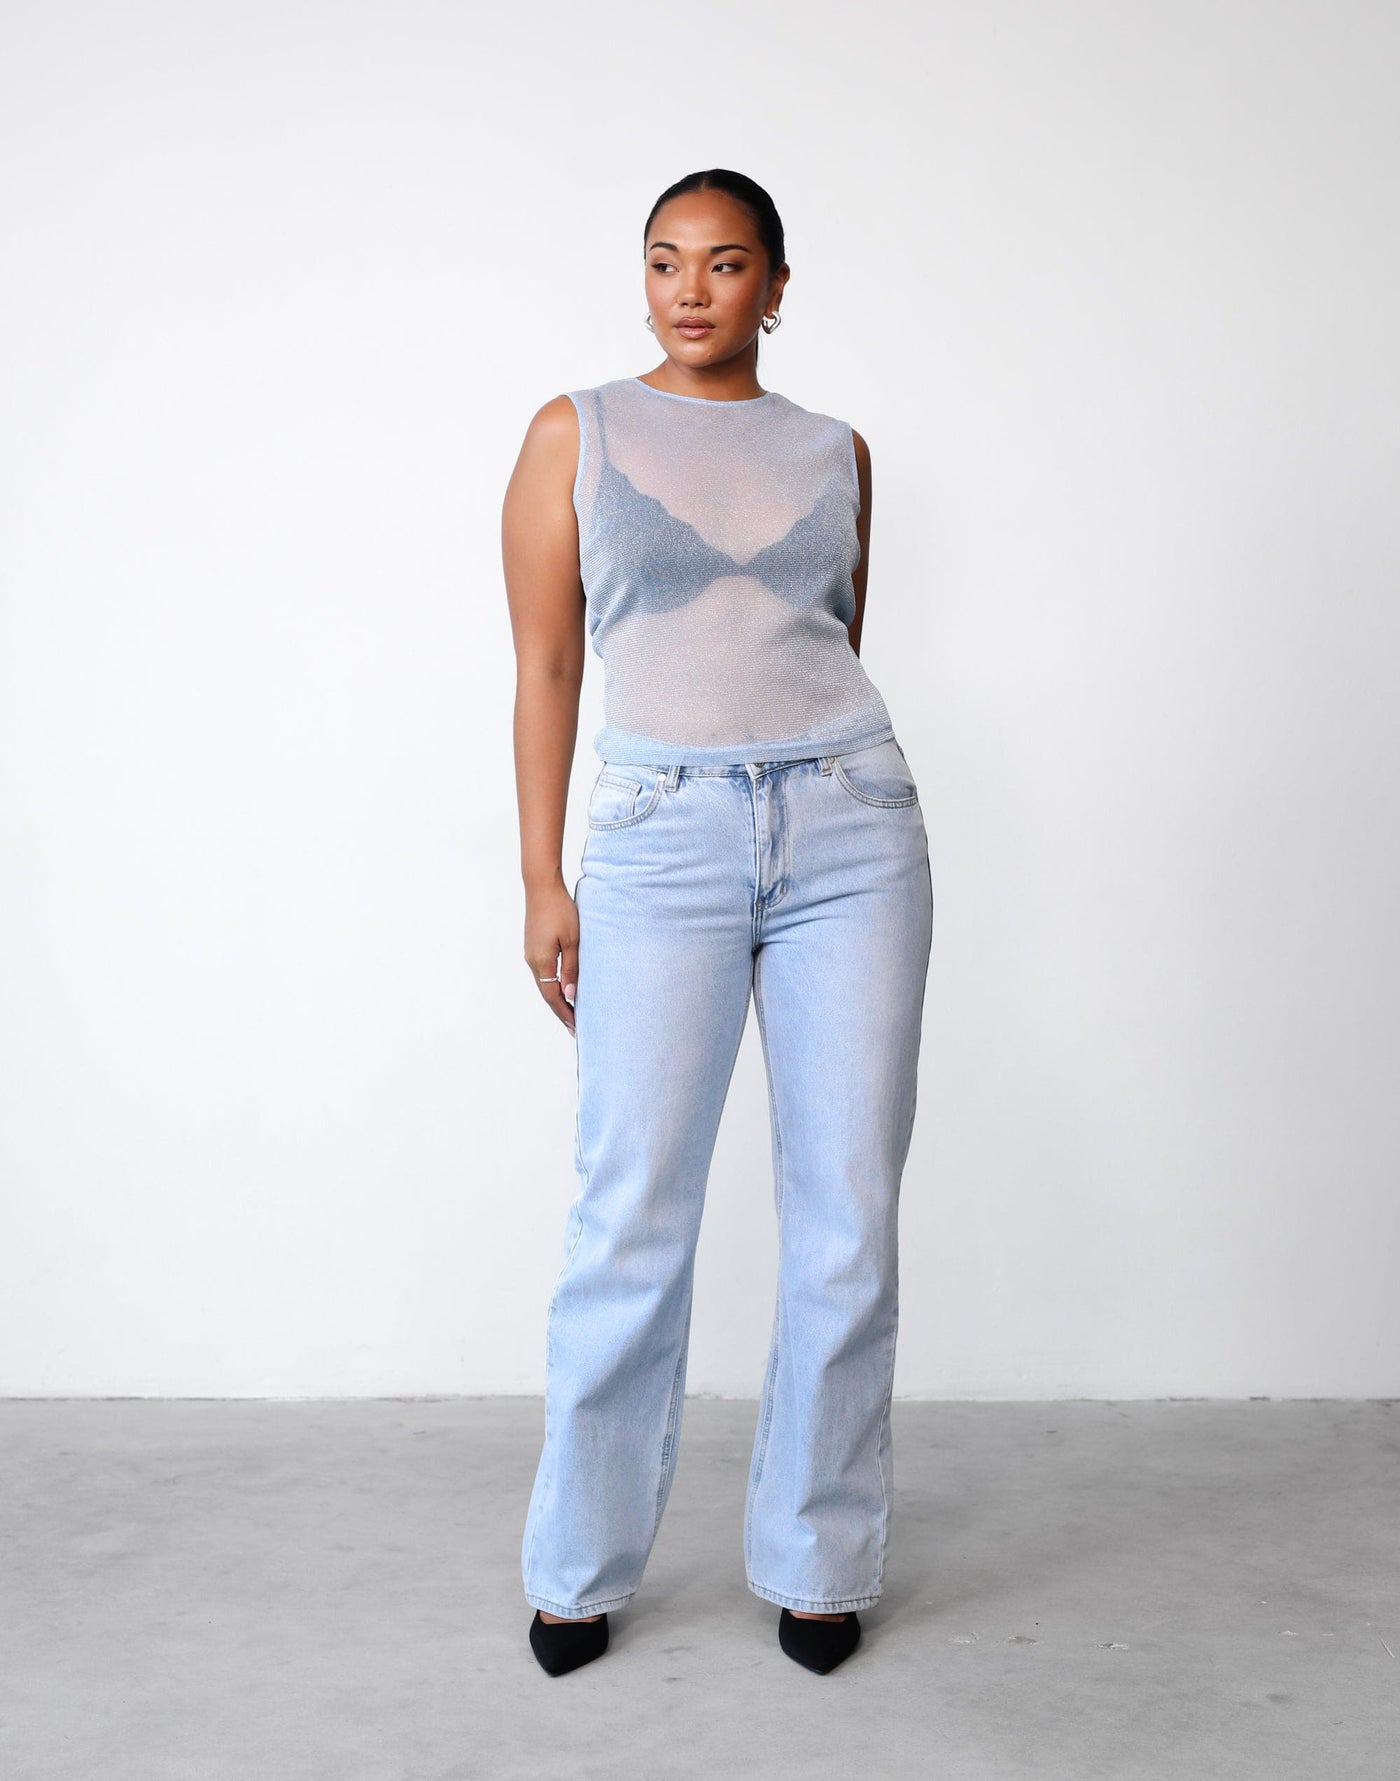 Mischa Mesh Tank (Ice Blue) | Charcoal Clothing Exclusive - Shimmer Detail Round Neckline Sheer Top - Women's Top - Charcoal Clothing